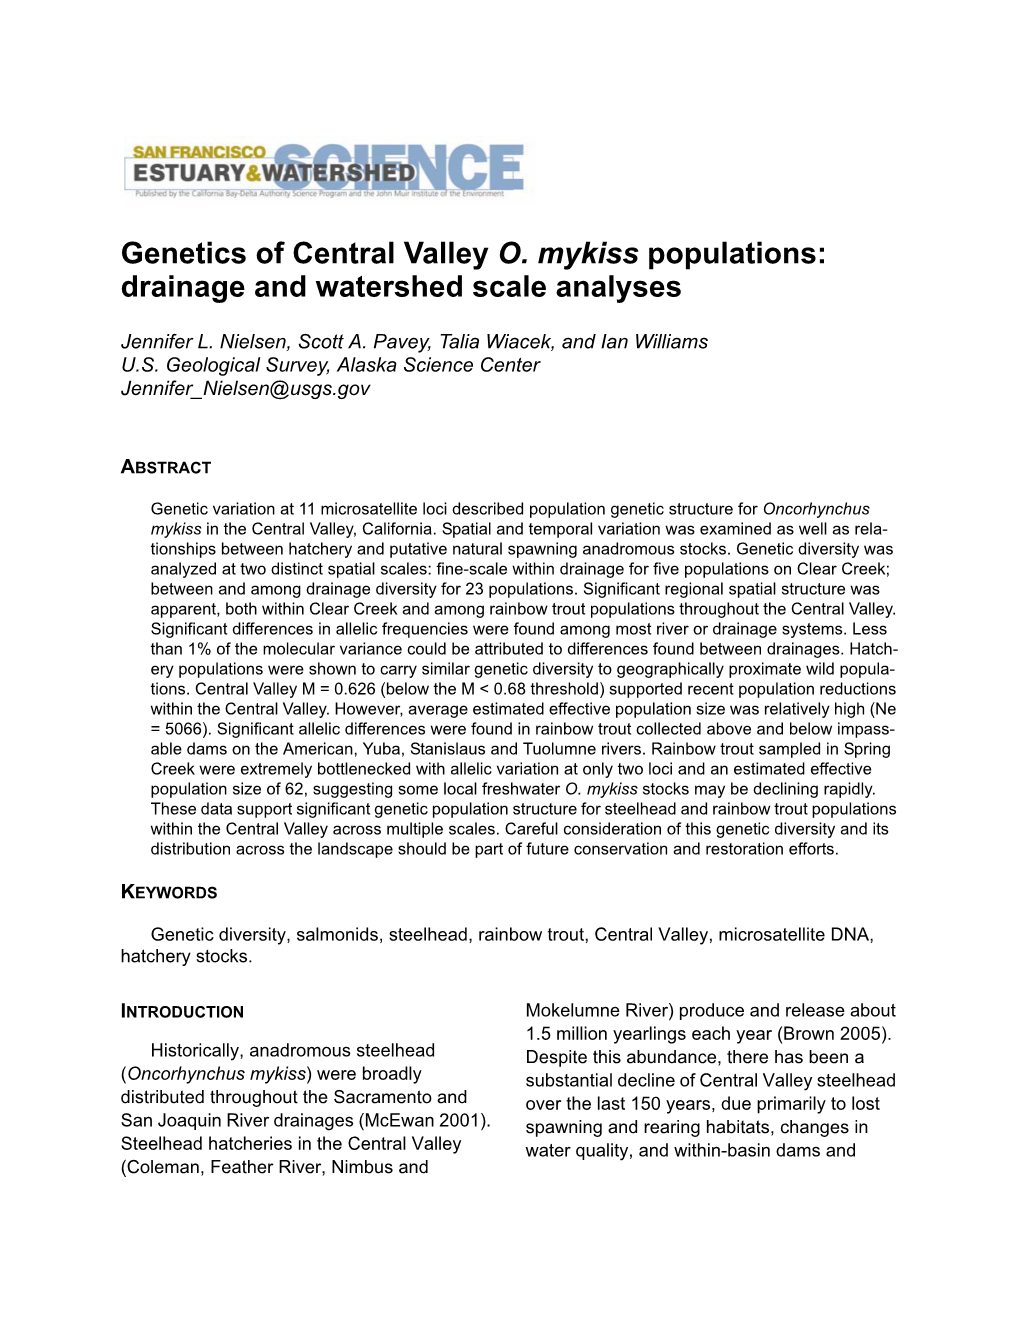 Genetics of Central Valley O. Mykiss Populations: Drainage and Watershed Scale Analyses